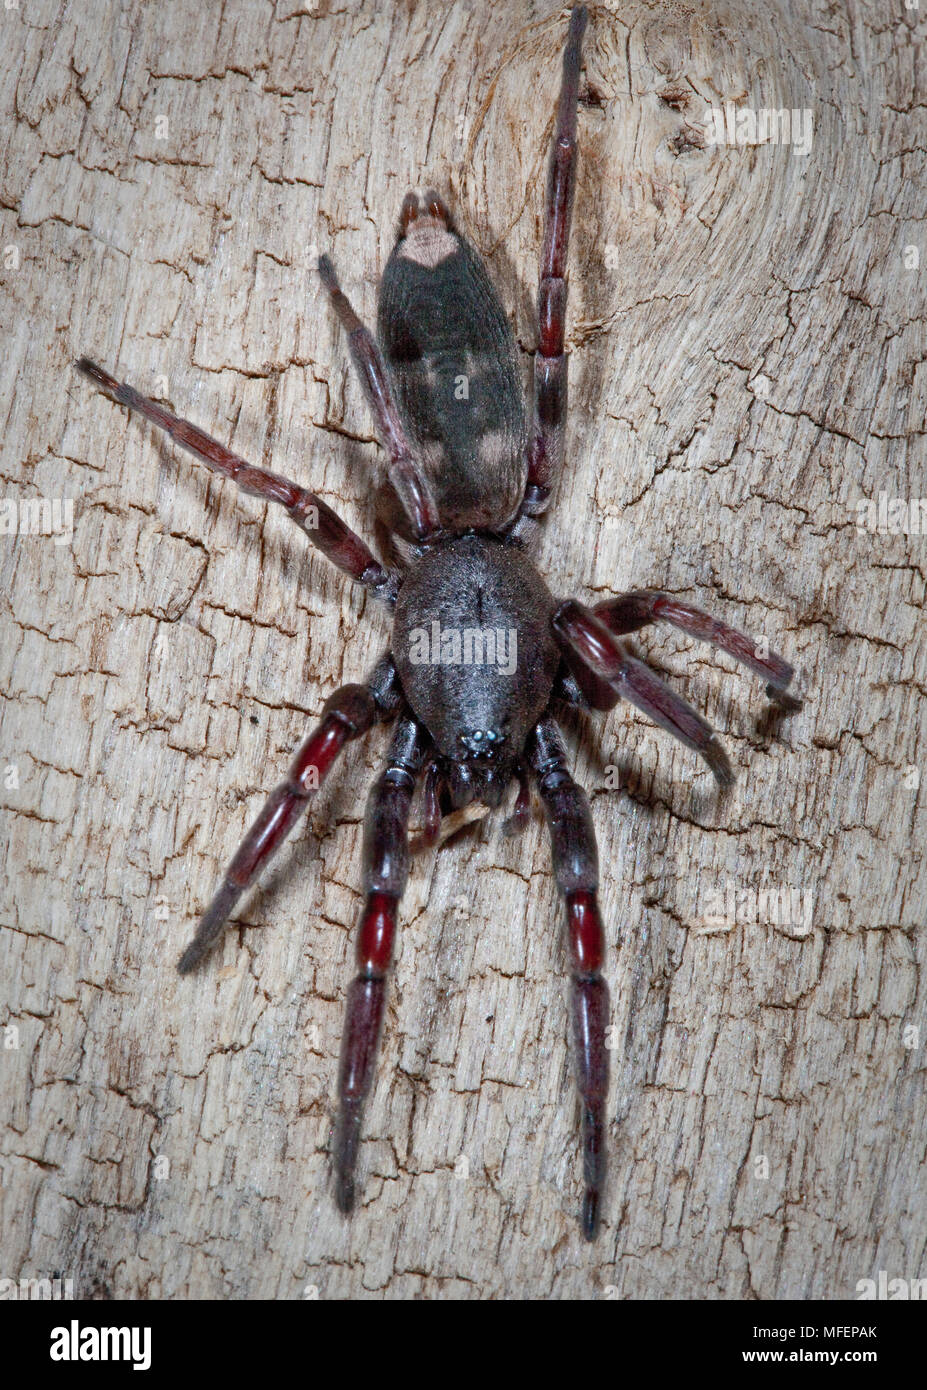 White-tailed Spider (Lampona cylindrata), Fam. Lamponidae, The bite of this spider is feared, because it can cause extensive tissue necrosis, female, Stock Photo